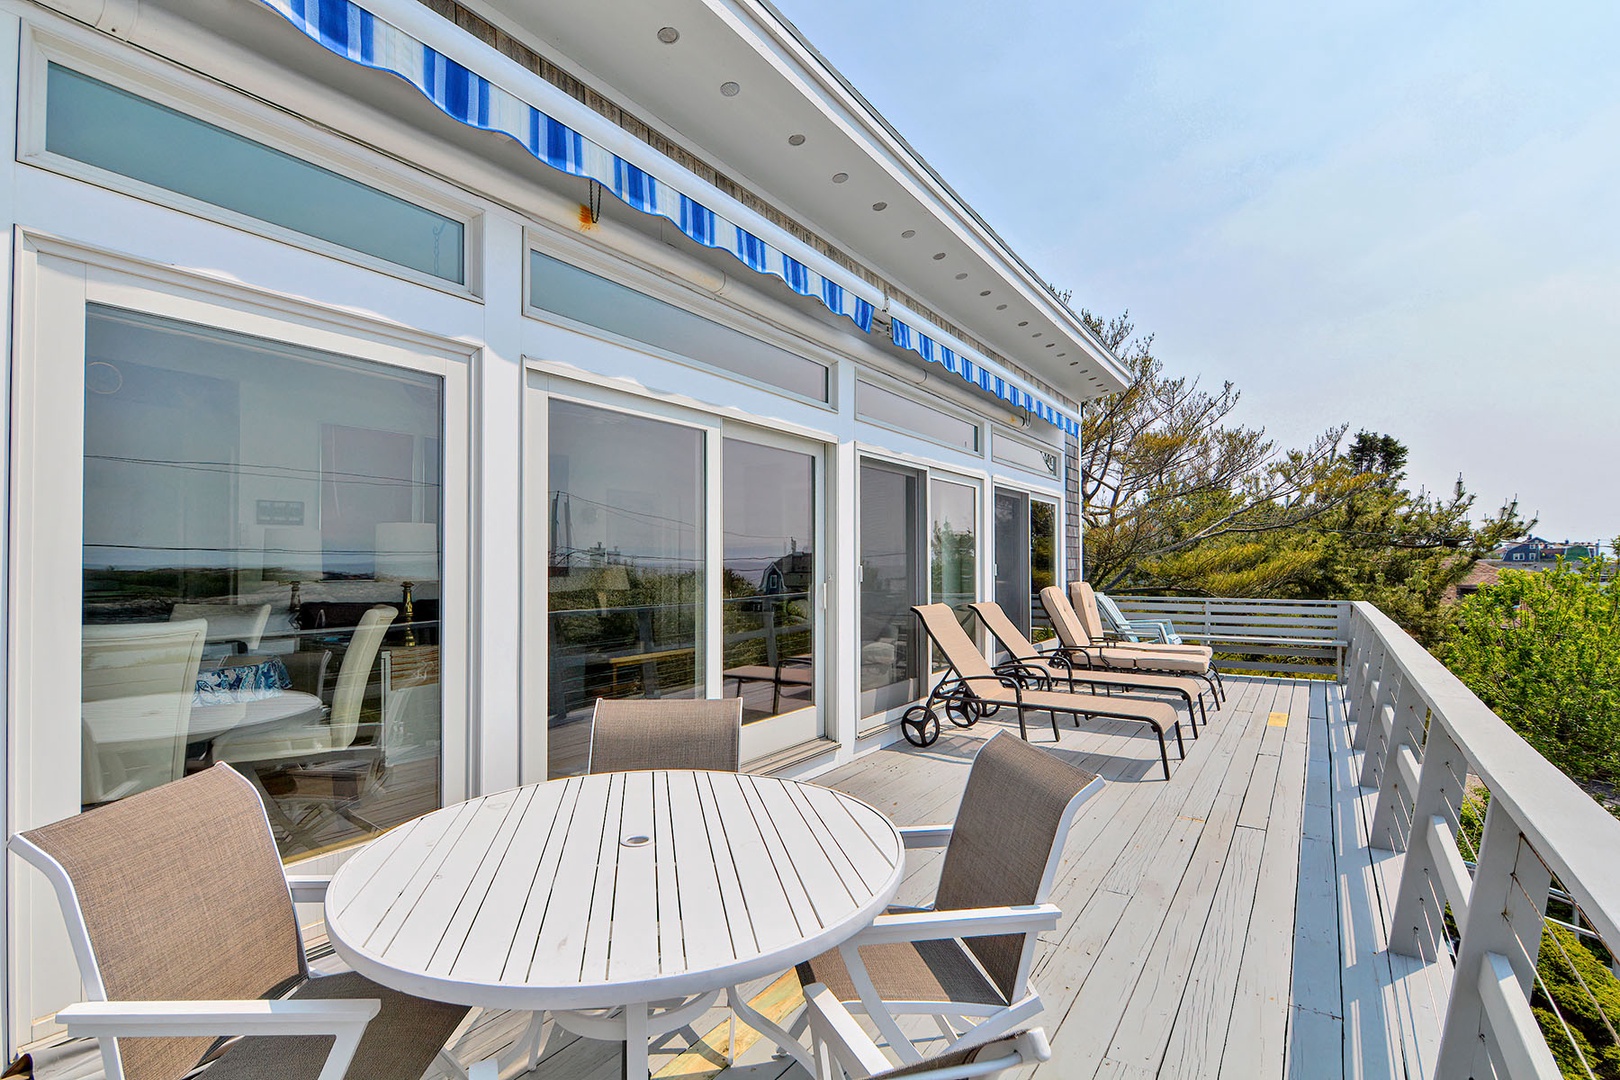 Eat or take your morning coffee on the spacious deck/